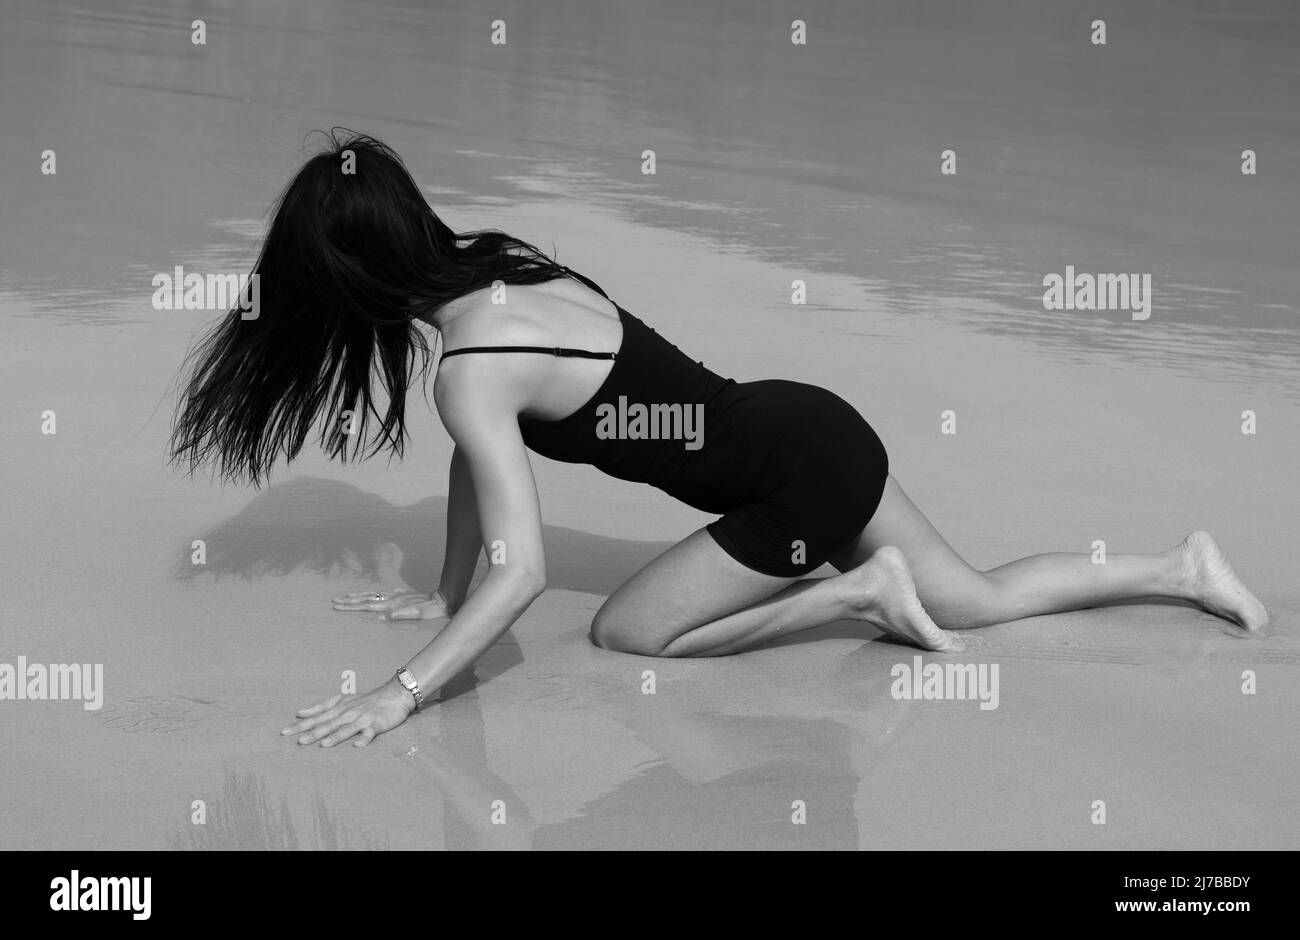 A woman wearing a short black dress with long black hair crawls on wet sand on the beach.  Her shadow and reflection can be seen.  Monochrome. Stock Photo